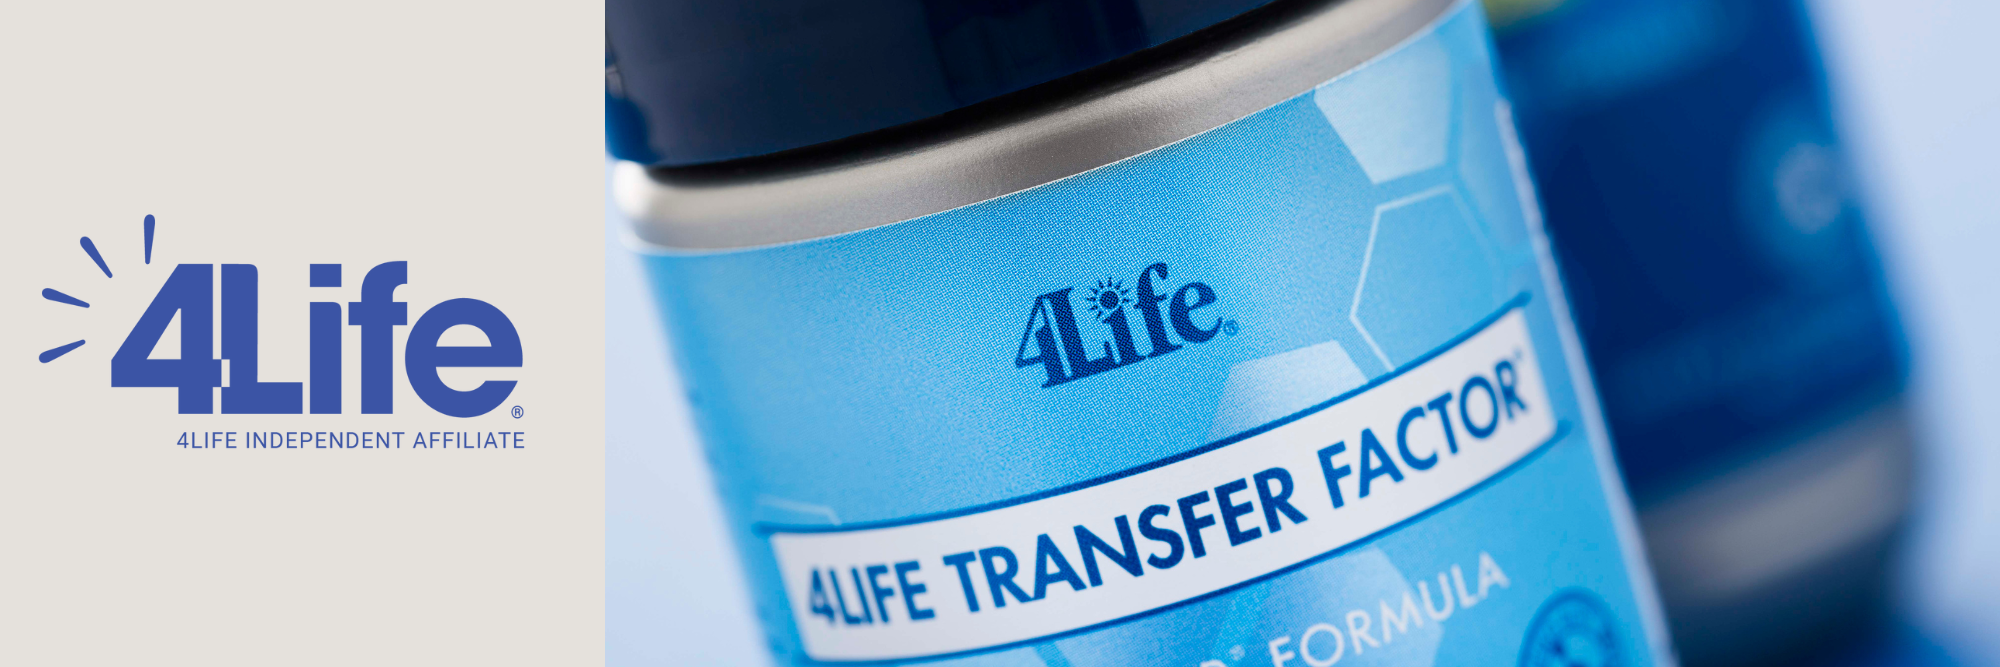 4life Research Transfer Factor